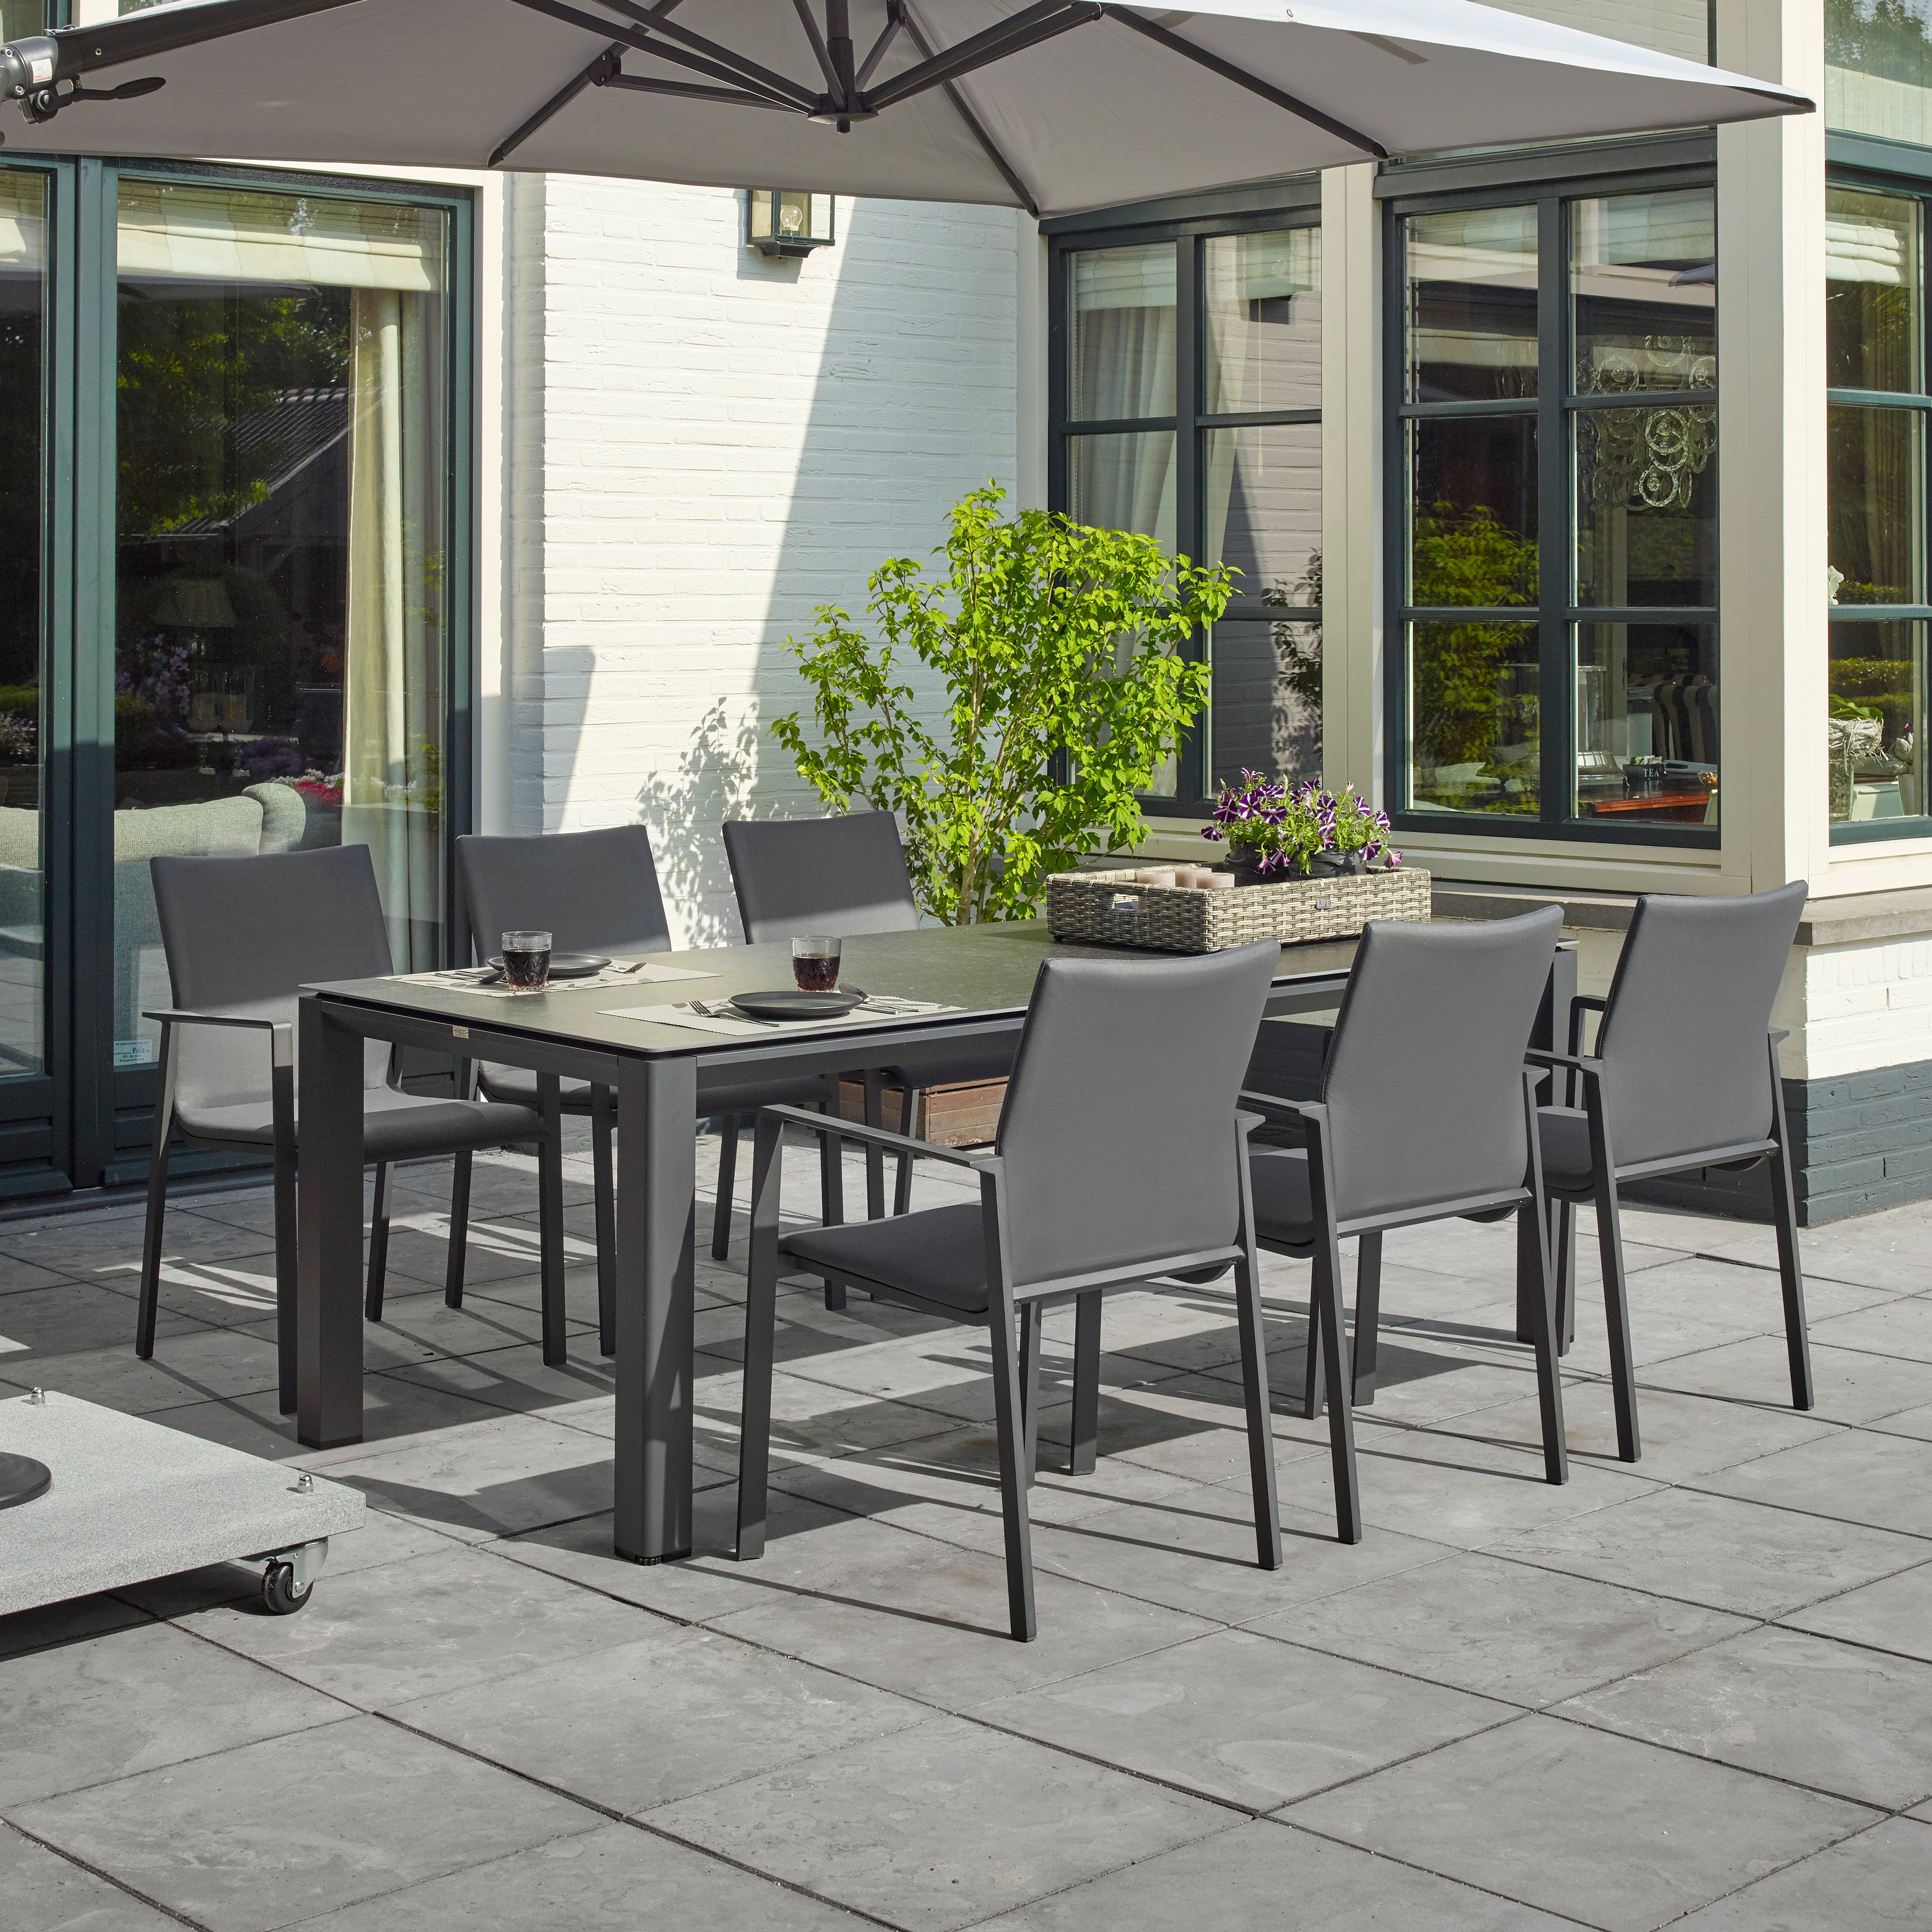 Dine alfresco in style with the Sense Dining Set. The sleek profile of the table and chairs give a clean, contemporary look. The dining chairs feature an aluminum frame with ergonomic arm rests and a comfortable all-weather sling with quick dry foam filling and all weather upholstery fabric. The ceramic top aluminum table is sturdy and weather resistant, ensuring years of outdoor dining enjoyment.